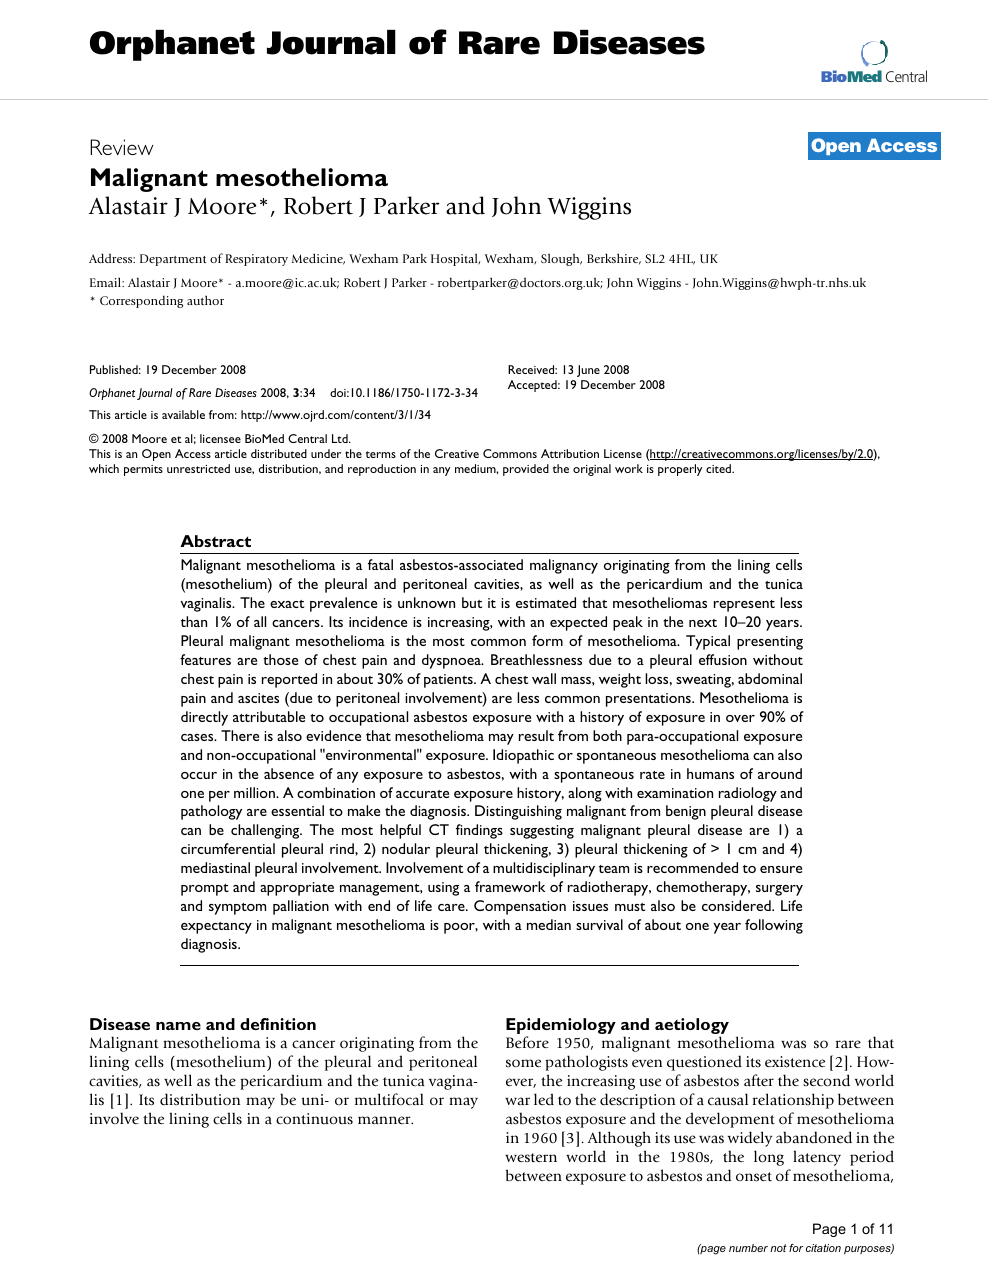 Malignant Mesothelioma Topic Of Research Paper In Clinical Medicine Download Scholarly Article Pdf And Read For Free On Cyberleninka Open Science Hub